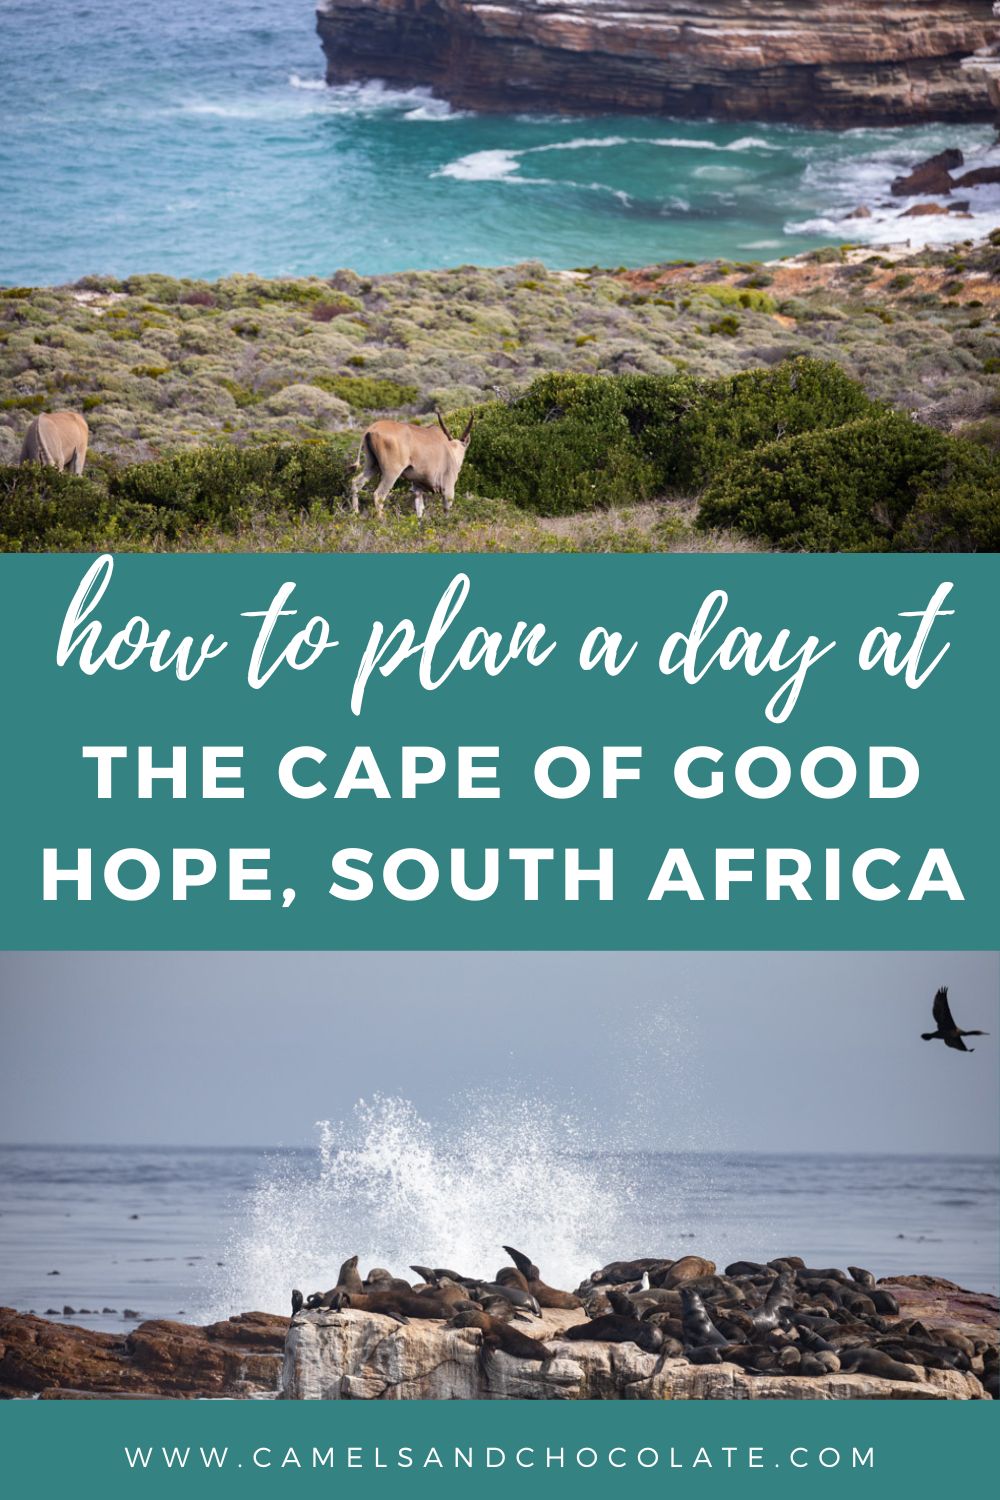 How to Visit Cape of Good Hope in South Africa